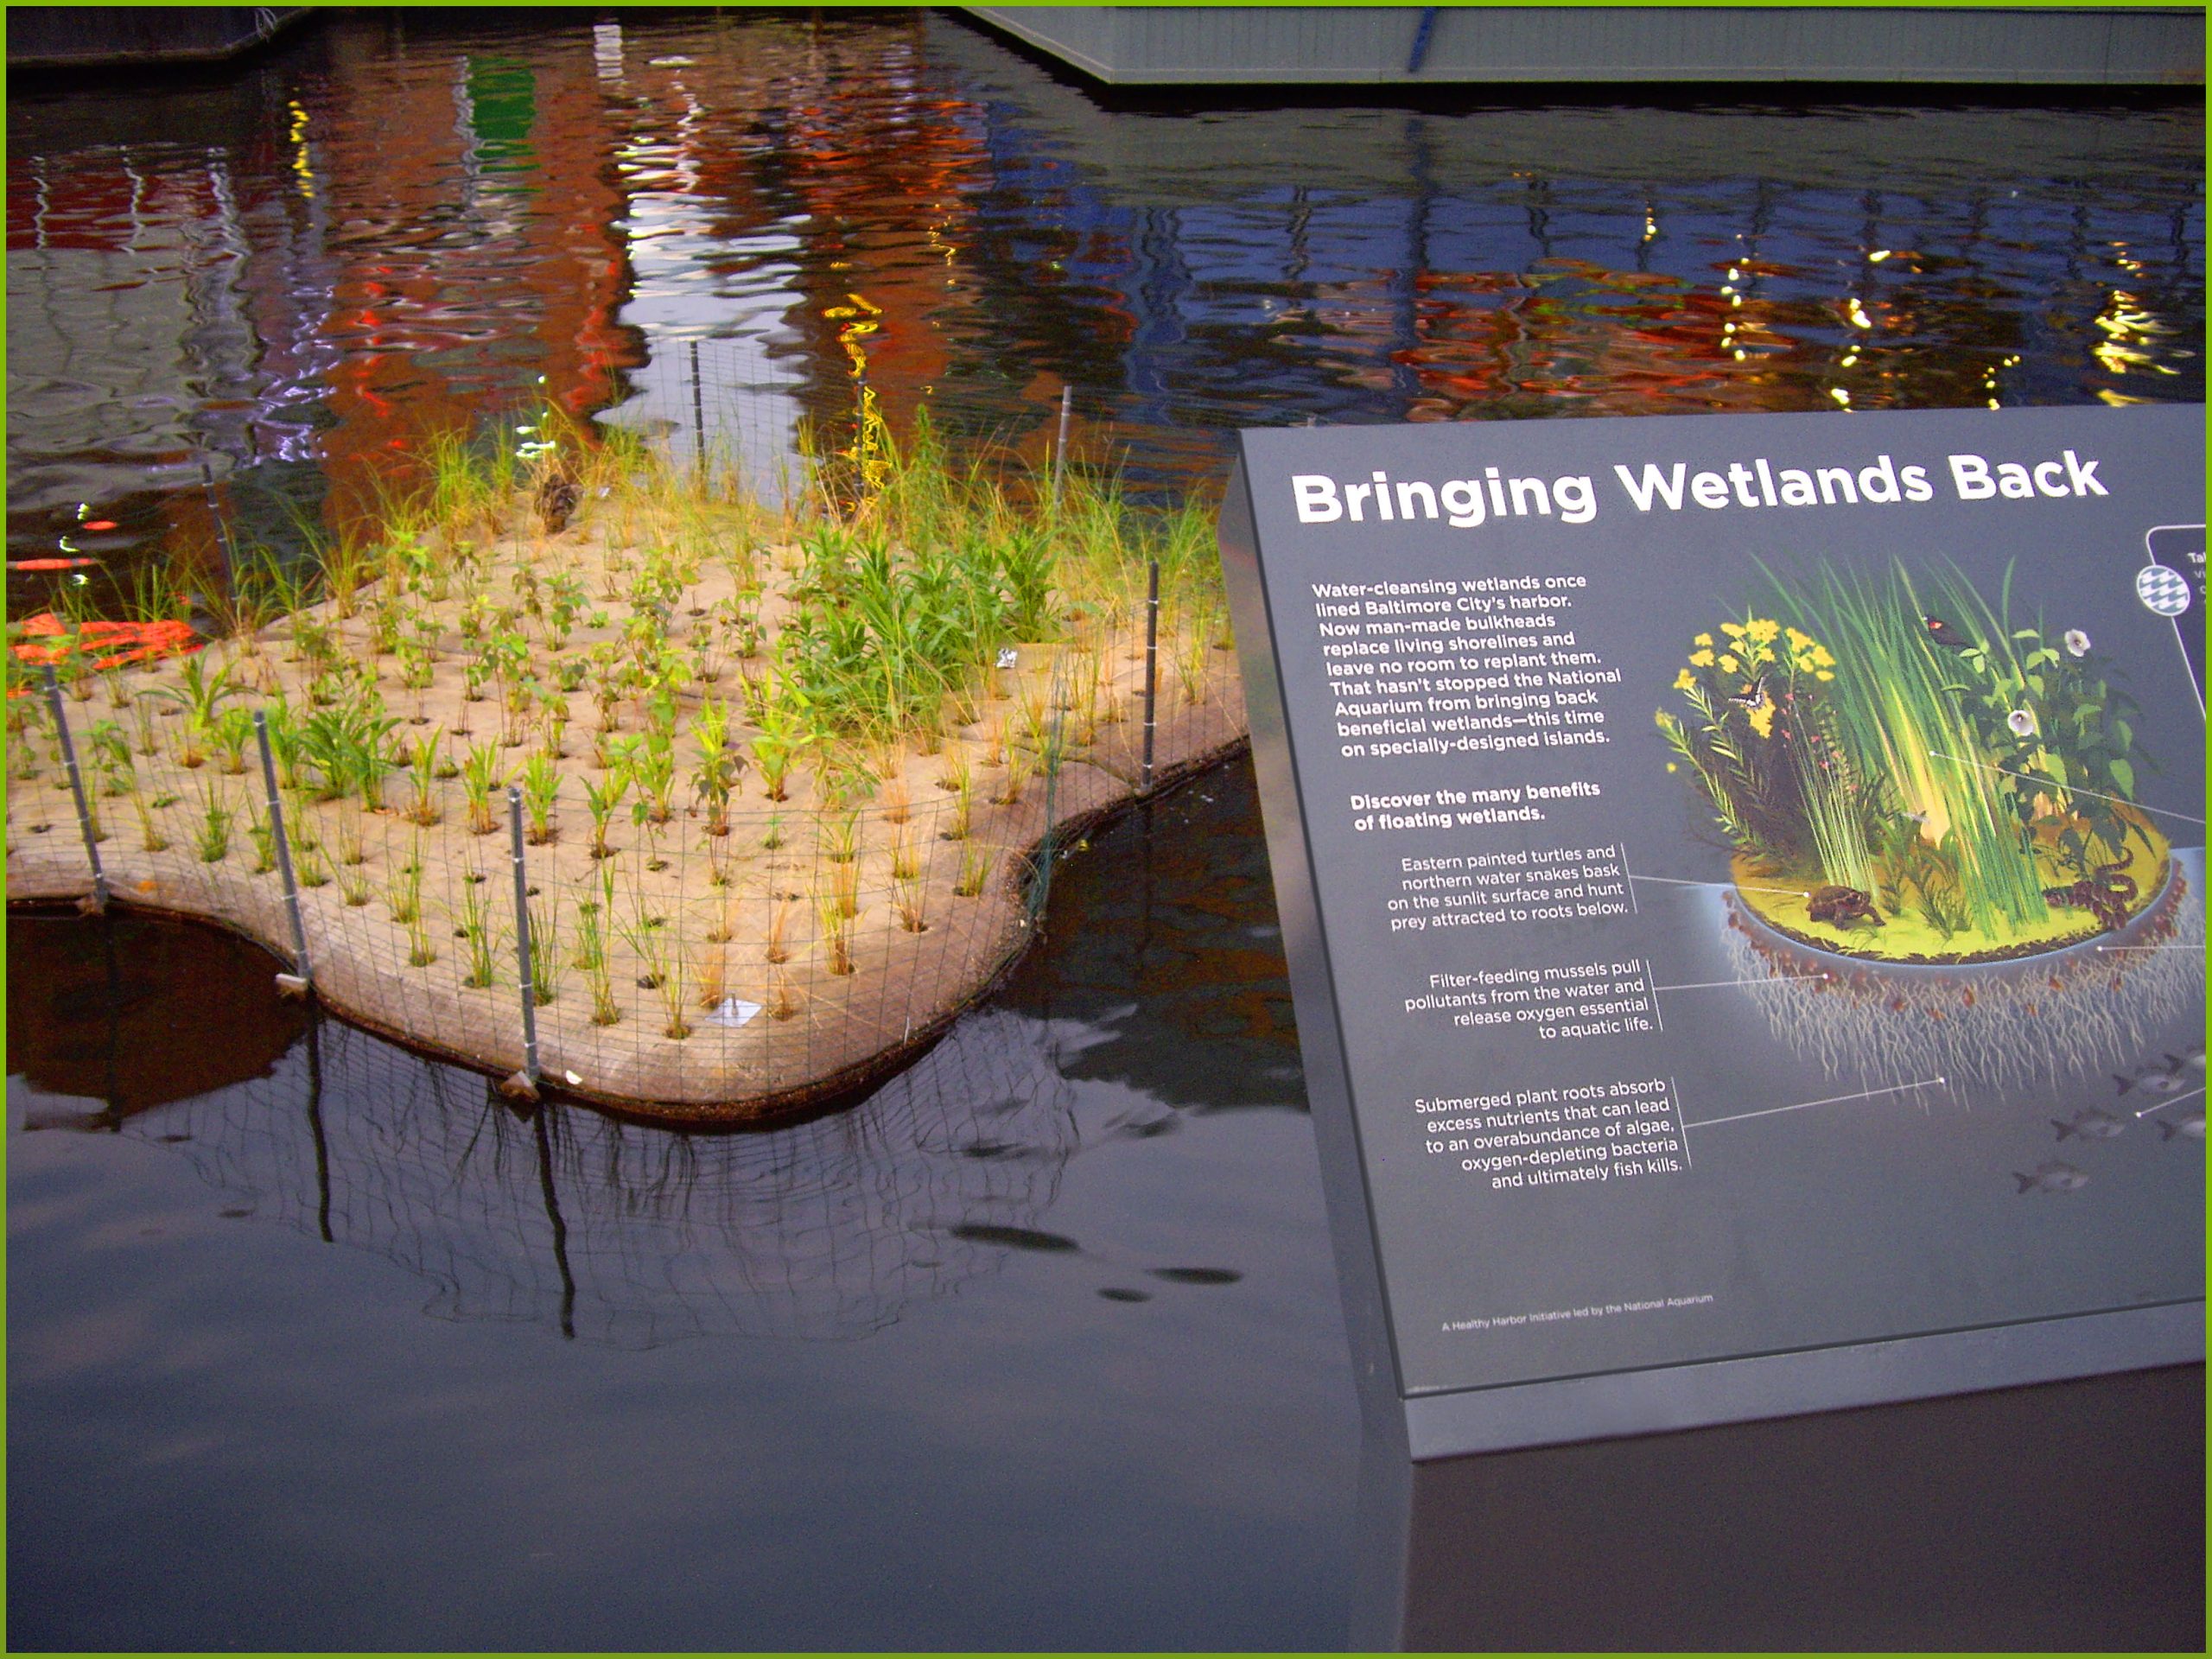 Photograph of floating wetland exhibit with an informational sign reading, "Bringing wetlands back."